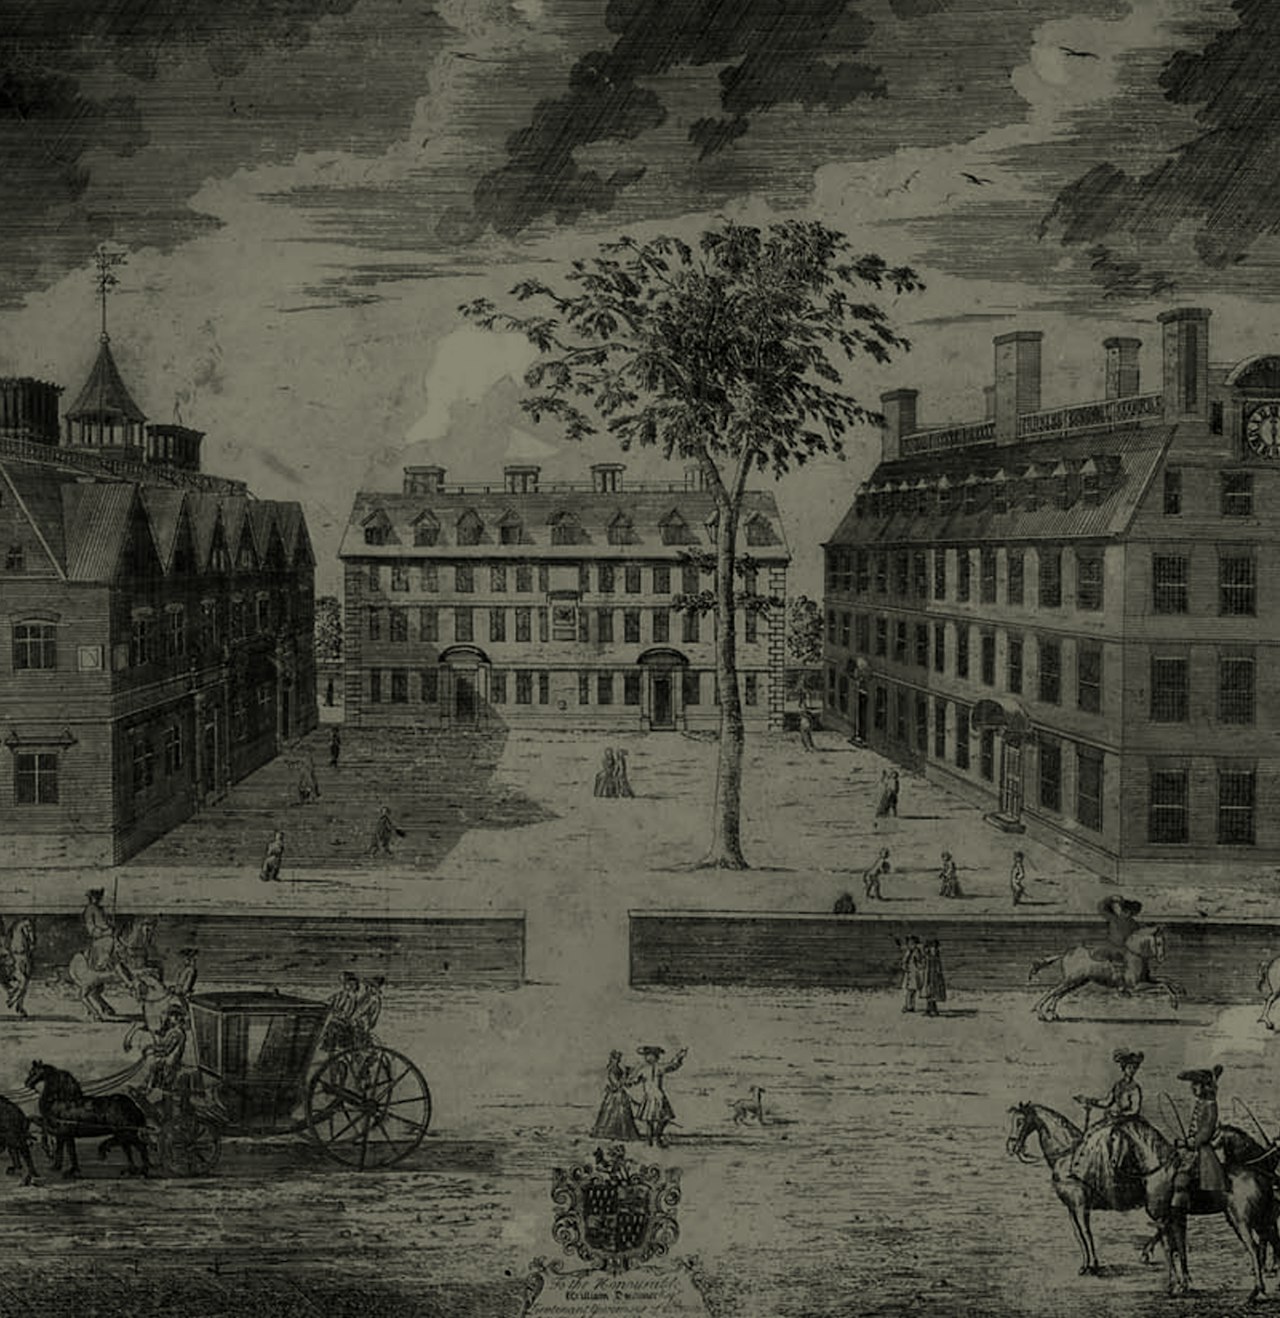 Illustration of Harvard College with what is now Massachusetts Avenue in the foreground, and college buildings, including Massachusetts Hall, in the background.